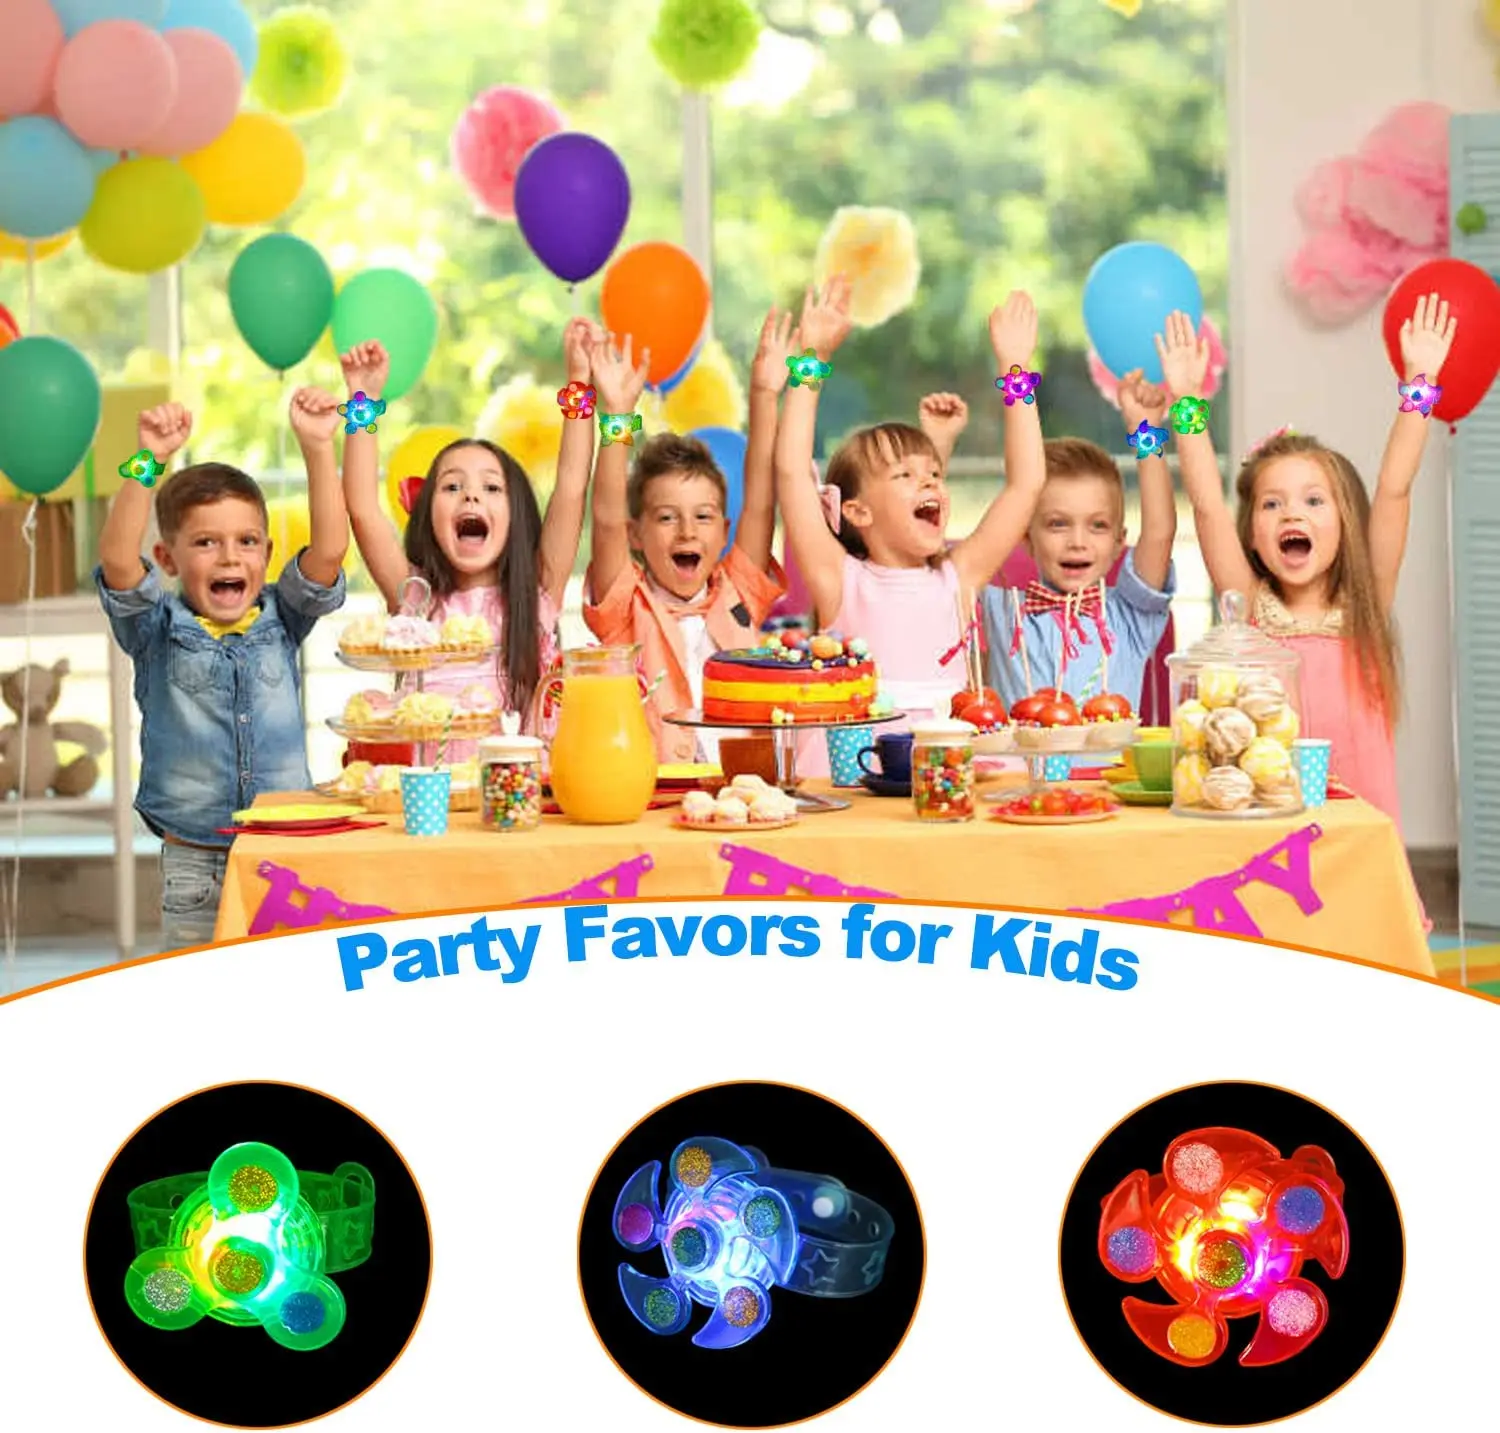 25 Pack LED Light Up Fidget Spinner Bracelets Party Favors For Kids,Glow in The Dark Party Supplies,Birthday Gifts,Treasure Box enlarge